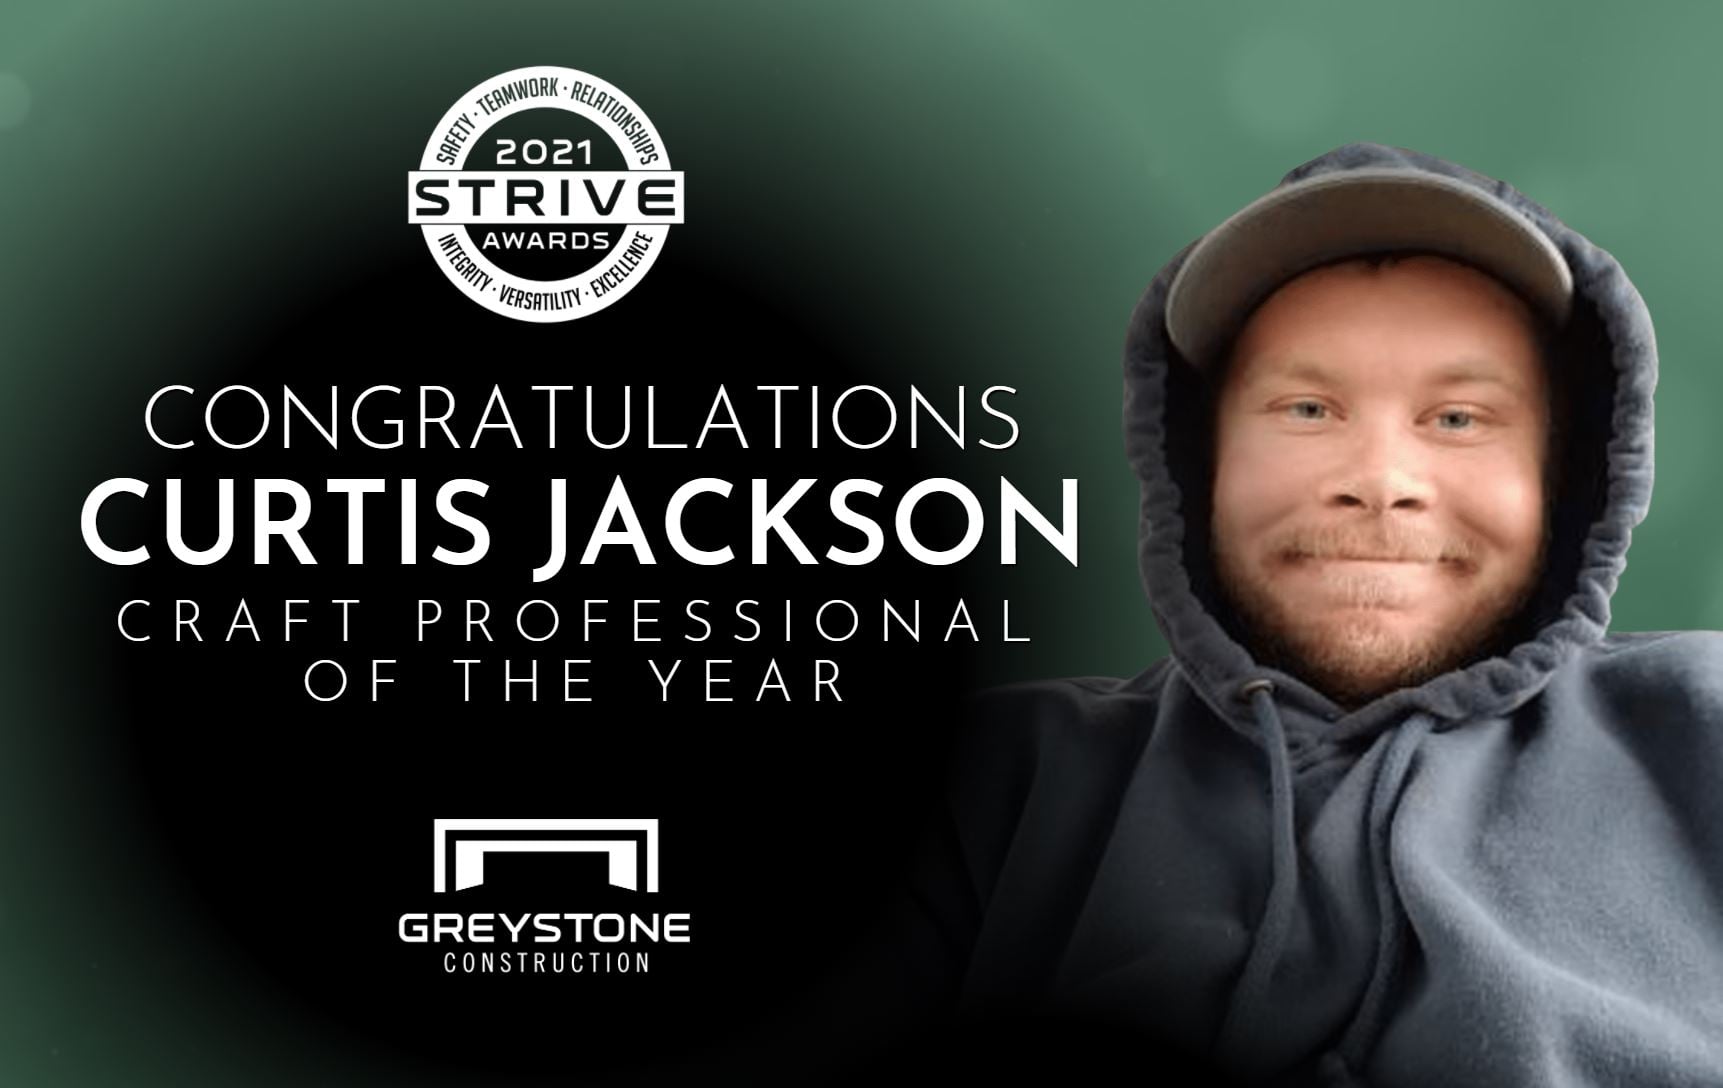 2021 STRIVE Award - Craft Professional of the Year - Curtis Jackson